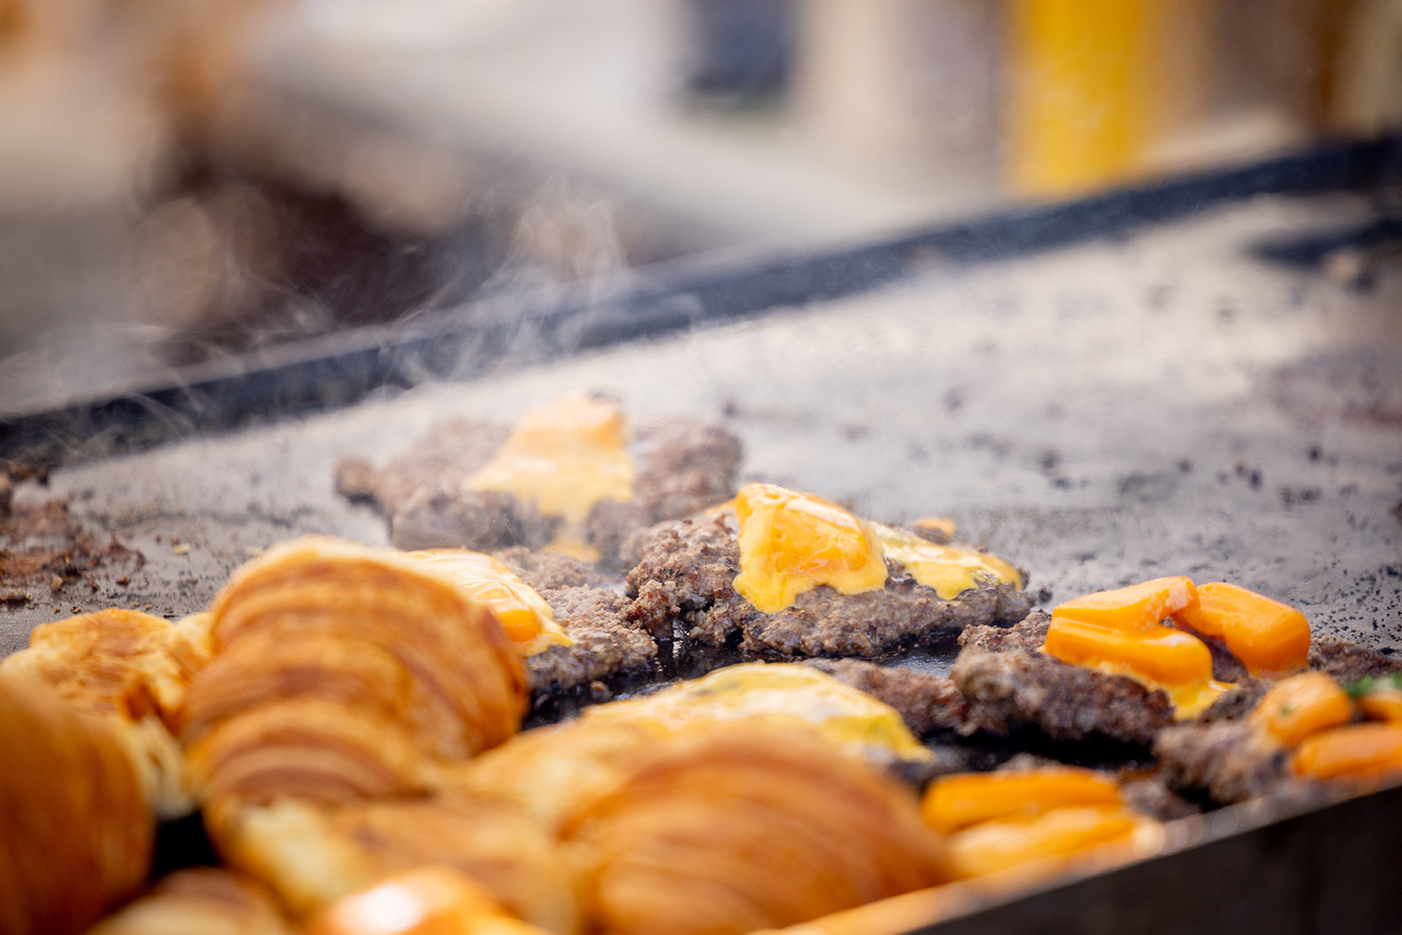 Cheese-topped meat patties sizzling on a griddle next to croissants